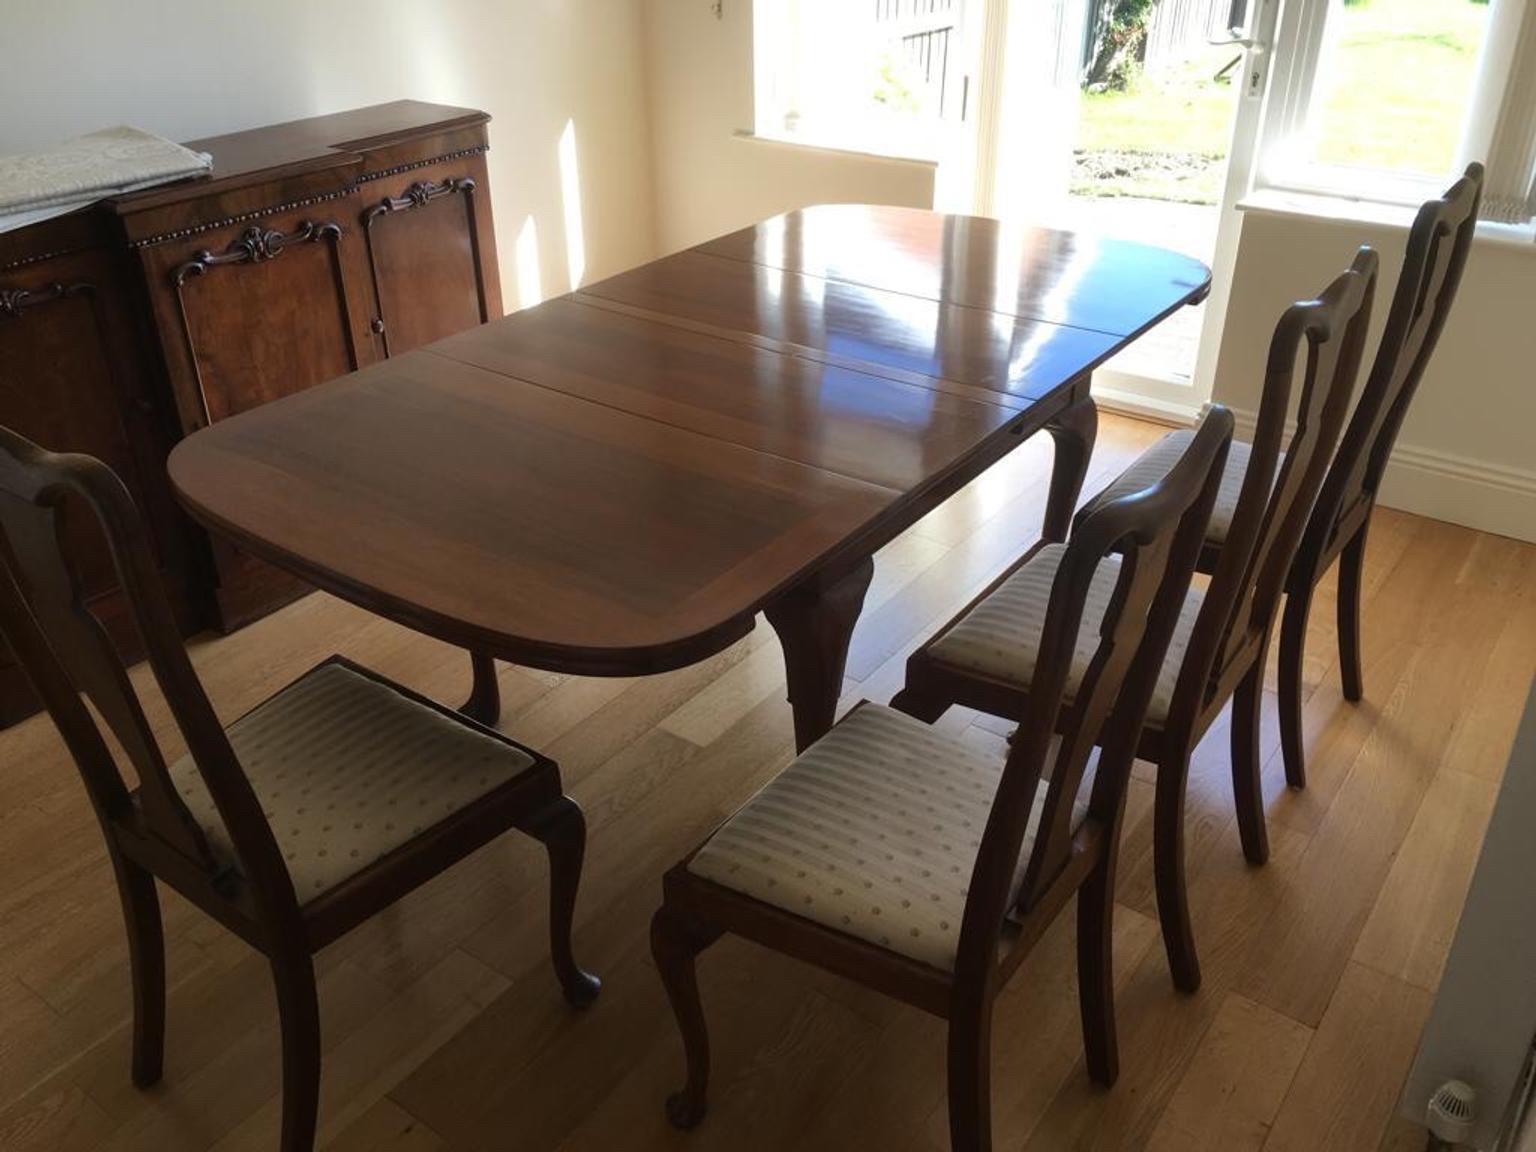 Mahogany Extending Table And 8 Chairs In De56 Valley For 200 00 For Sale Shpock